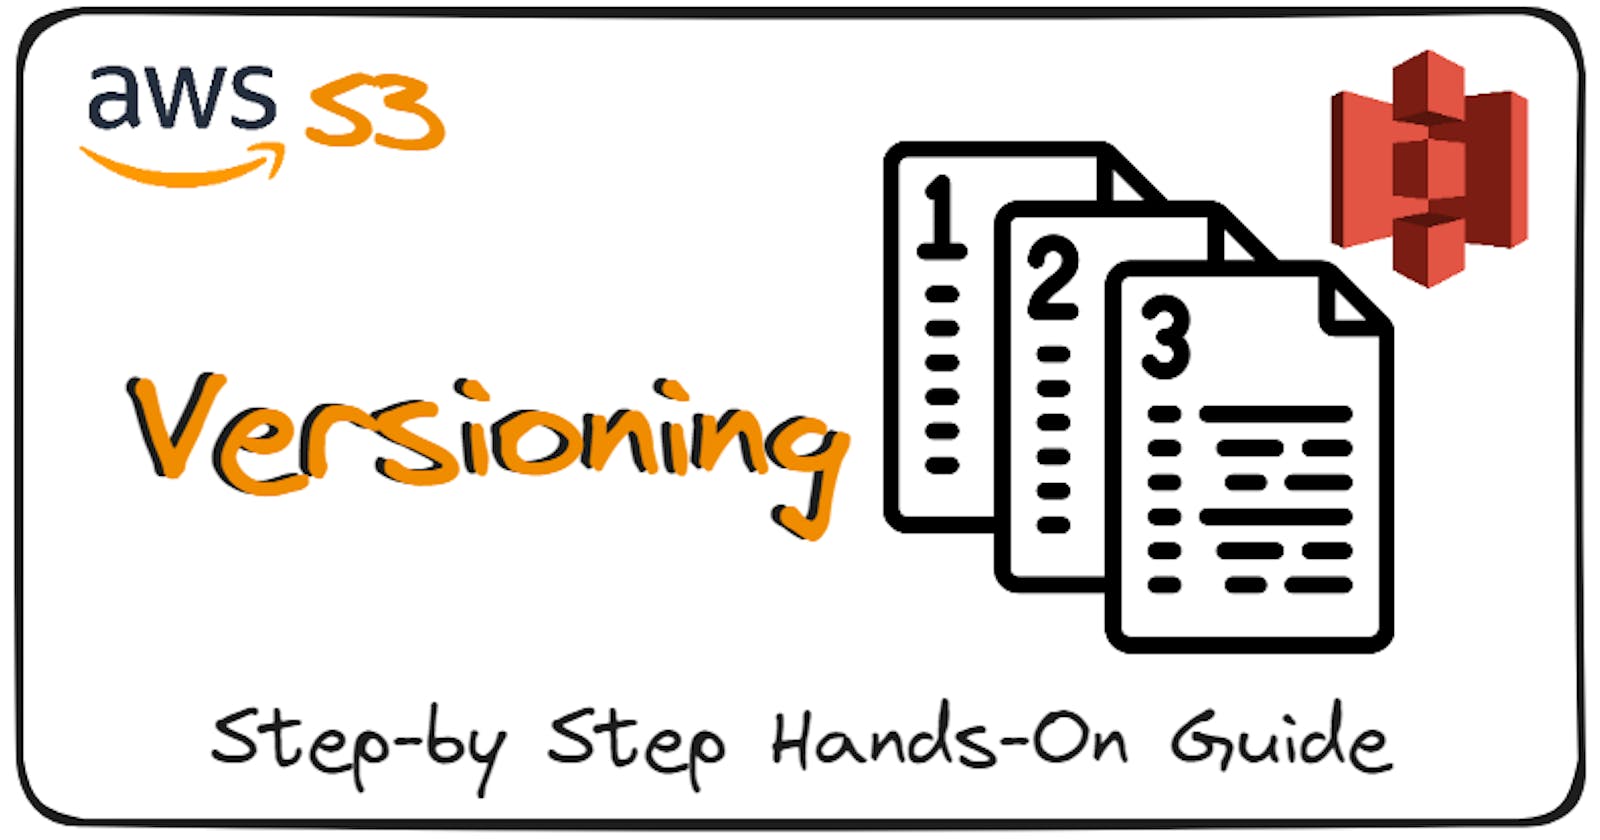 Amazon S3 Versioning: Hands-On | A Step-by-Step Guide